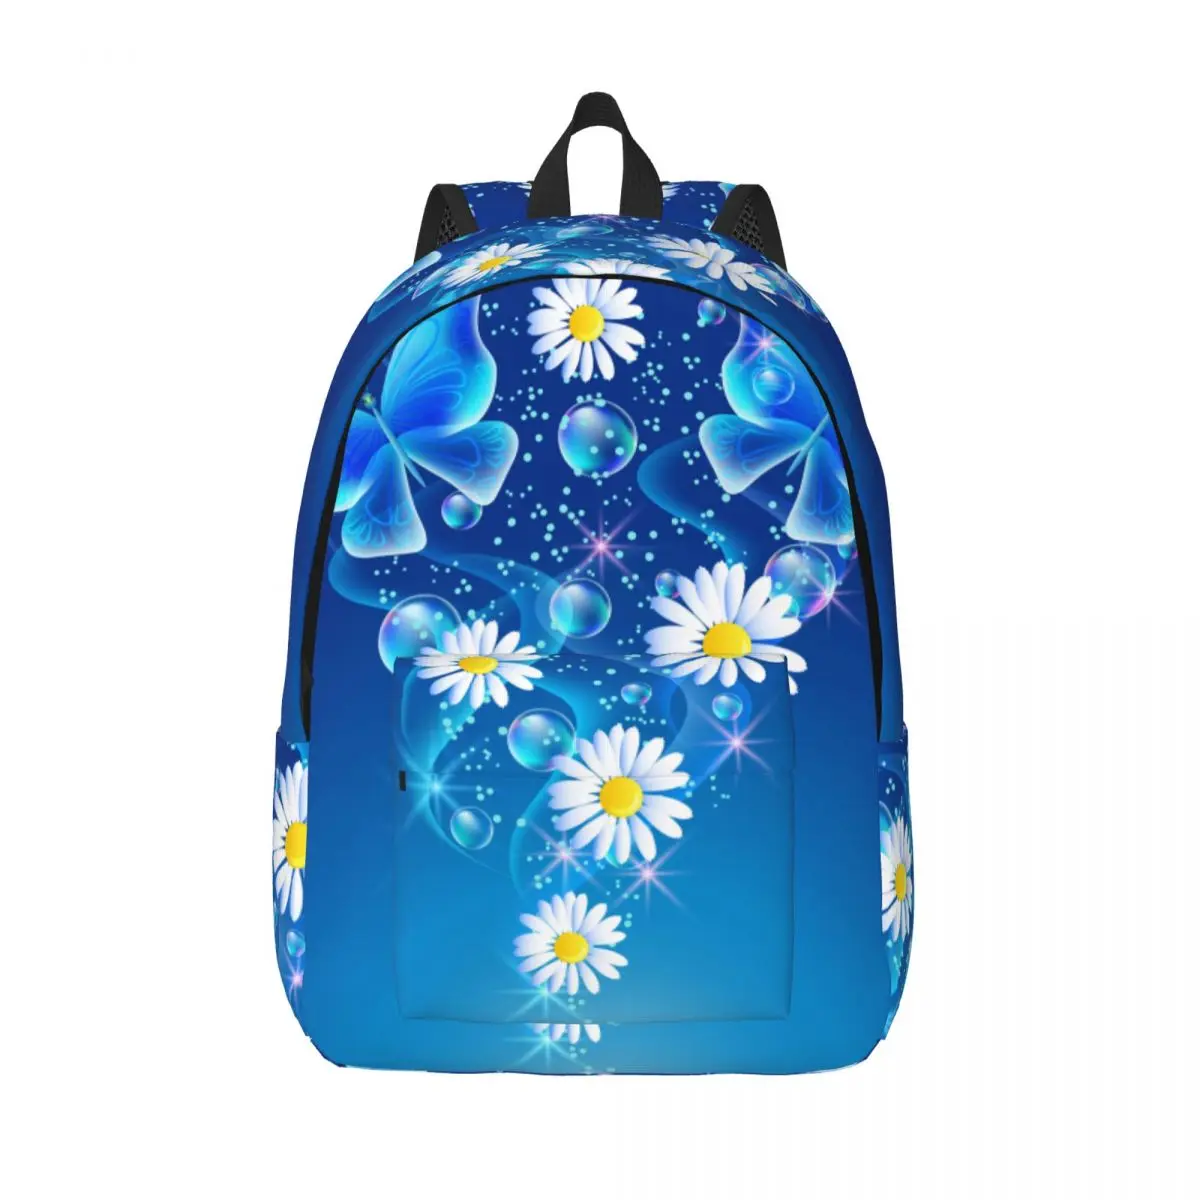 

Butterflies With Bubbles And Daisy In The Sky Backpack Unisex Travel Bag Schoolbag Bookbag Mochila